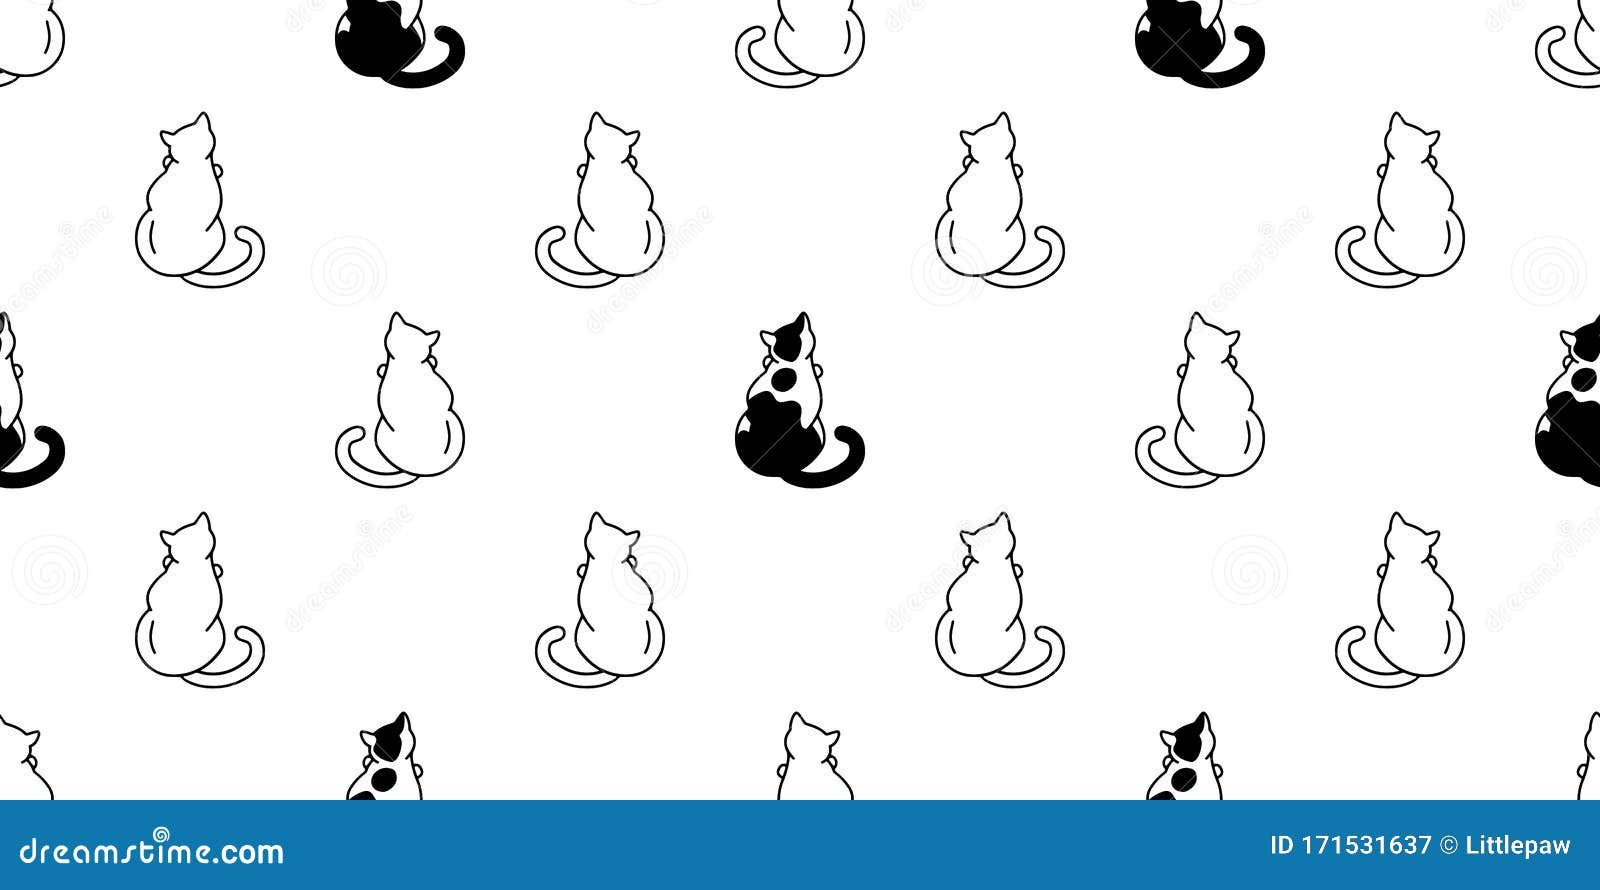 seamless pattern with cute black and white cats. texture for wallpapers, stationery, fabric, wrap, web page backgrounds,  il